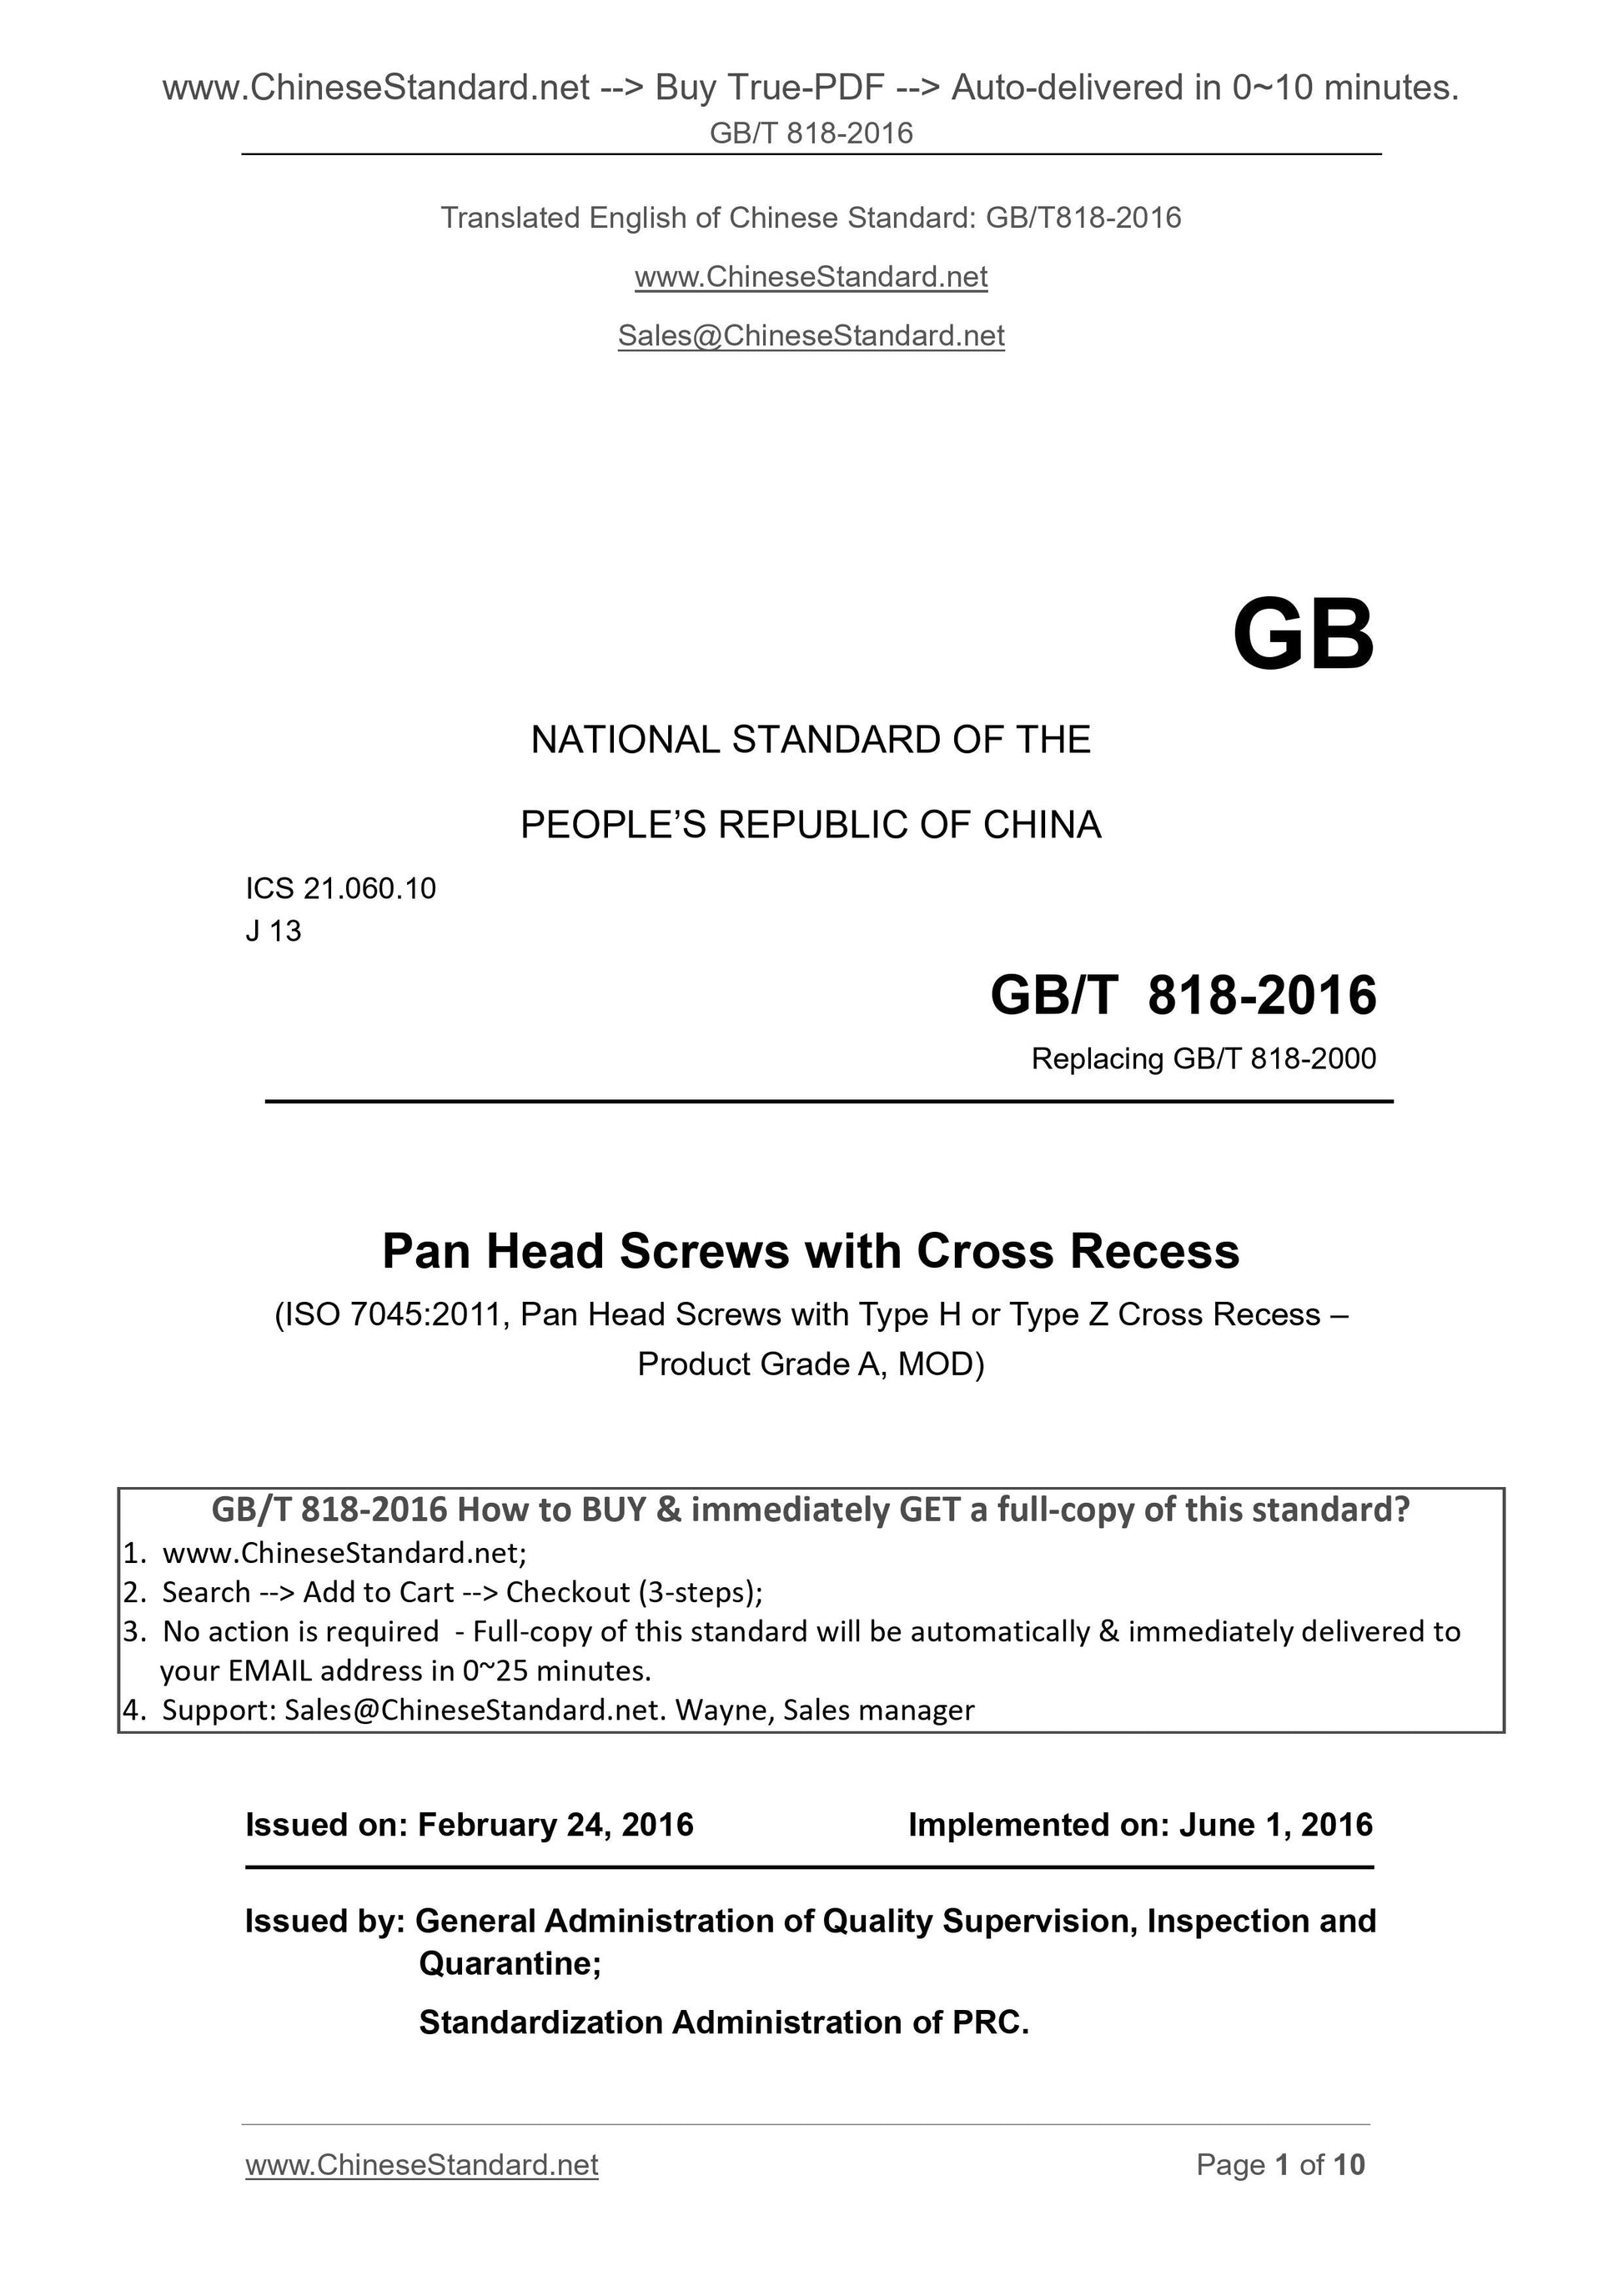 GB/T 818-2016 Page 1